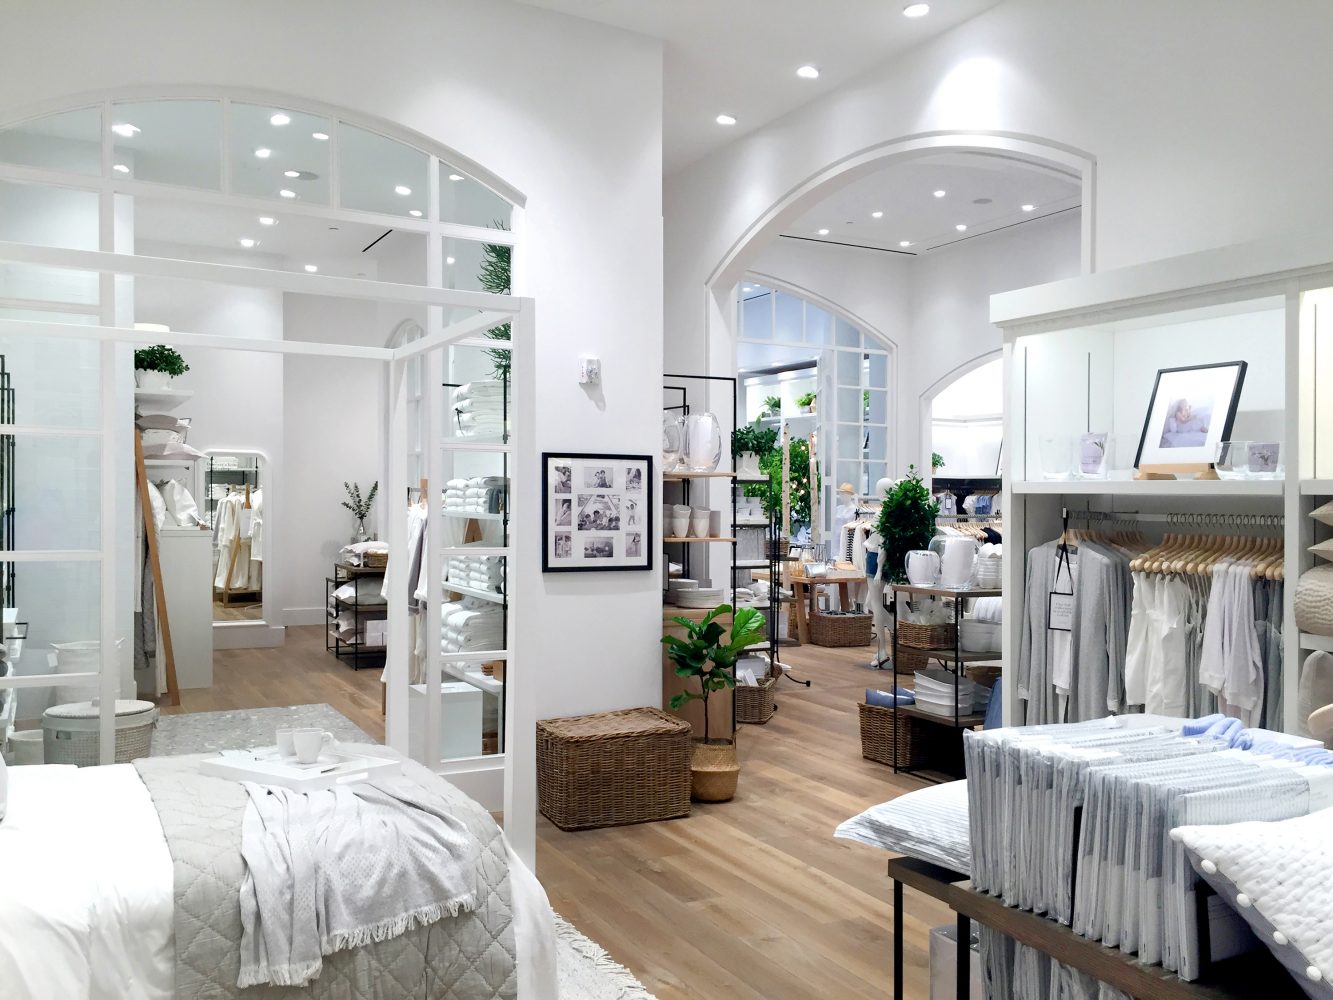 Internal image of product display at The White Company New York, Flagship Design by Household.